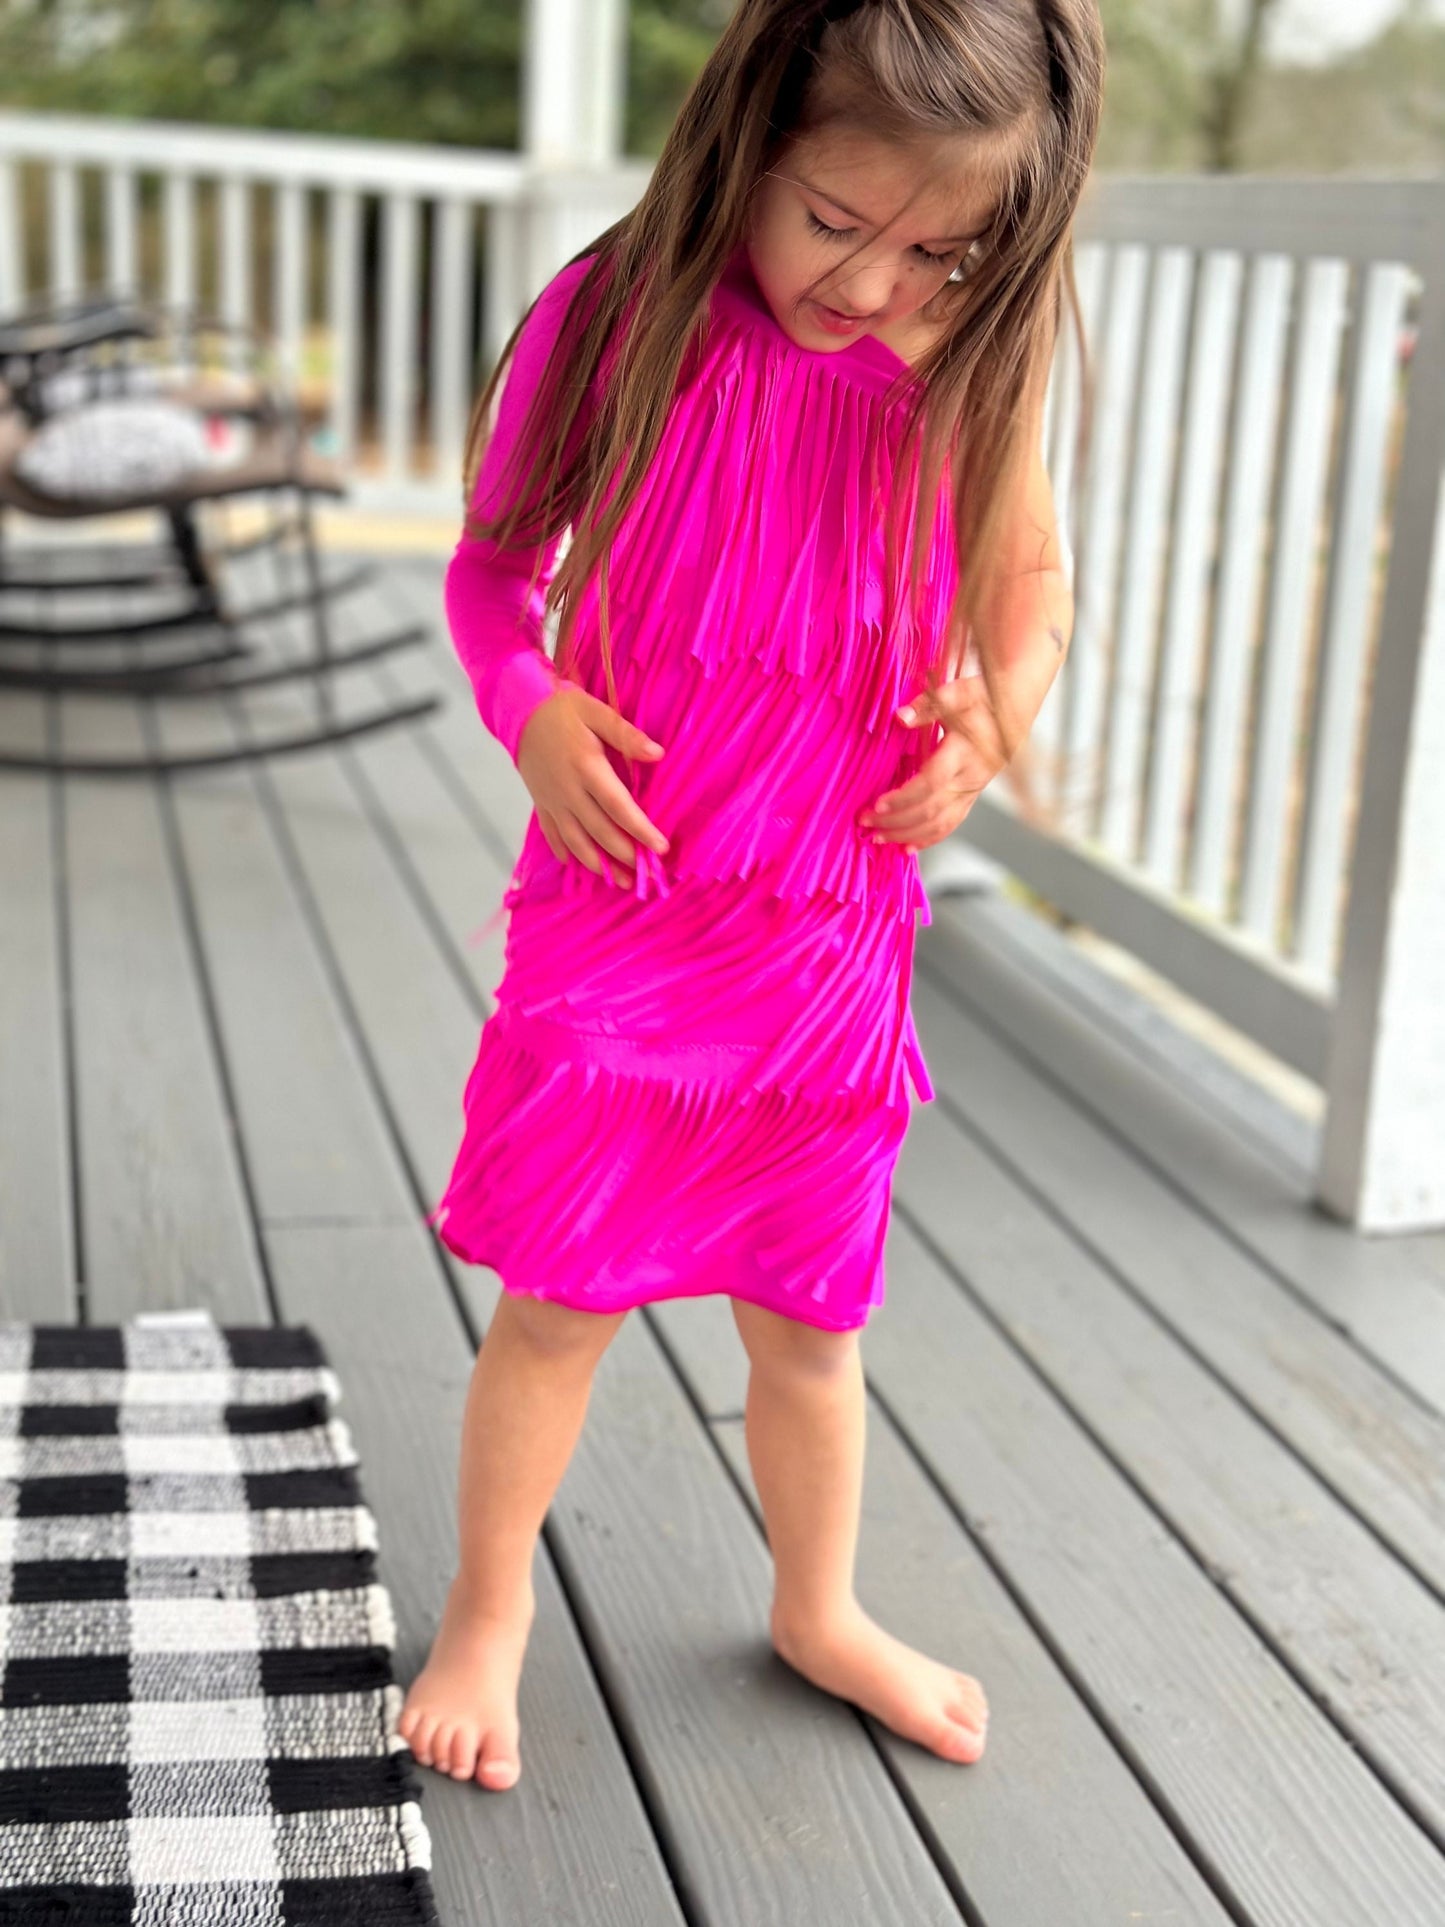 Electric Cowgirl Boho Chic Rodeo Ready One Shoulder Fringe Dress for Free-Spirited Kids - Available in Multiple Colors and Sleeve Styles.